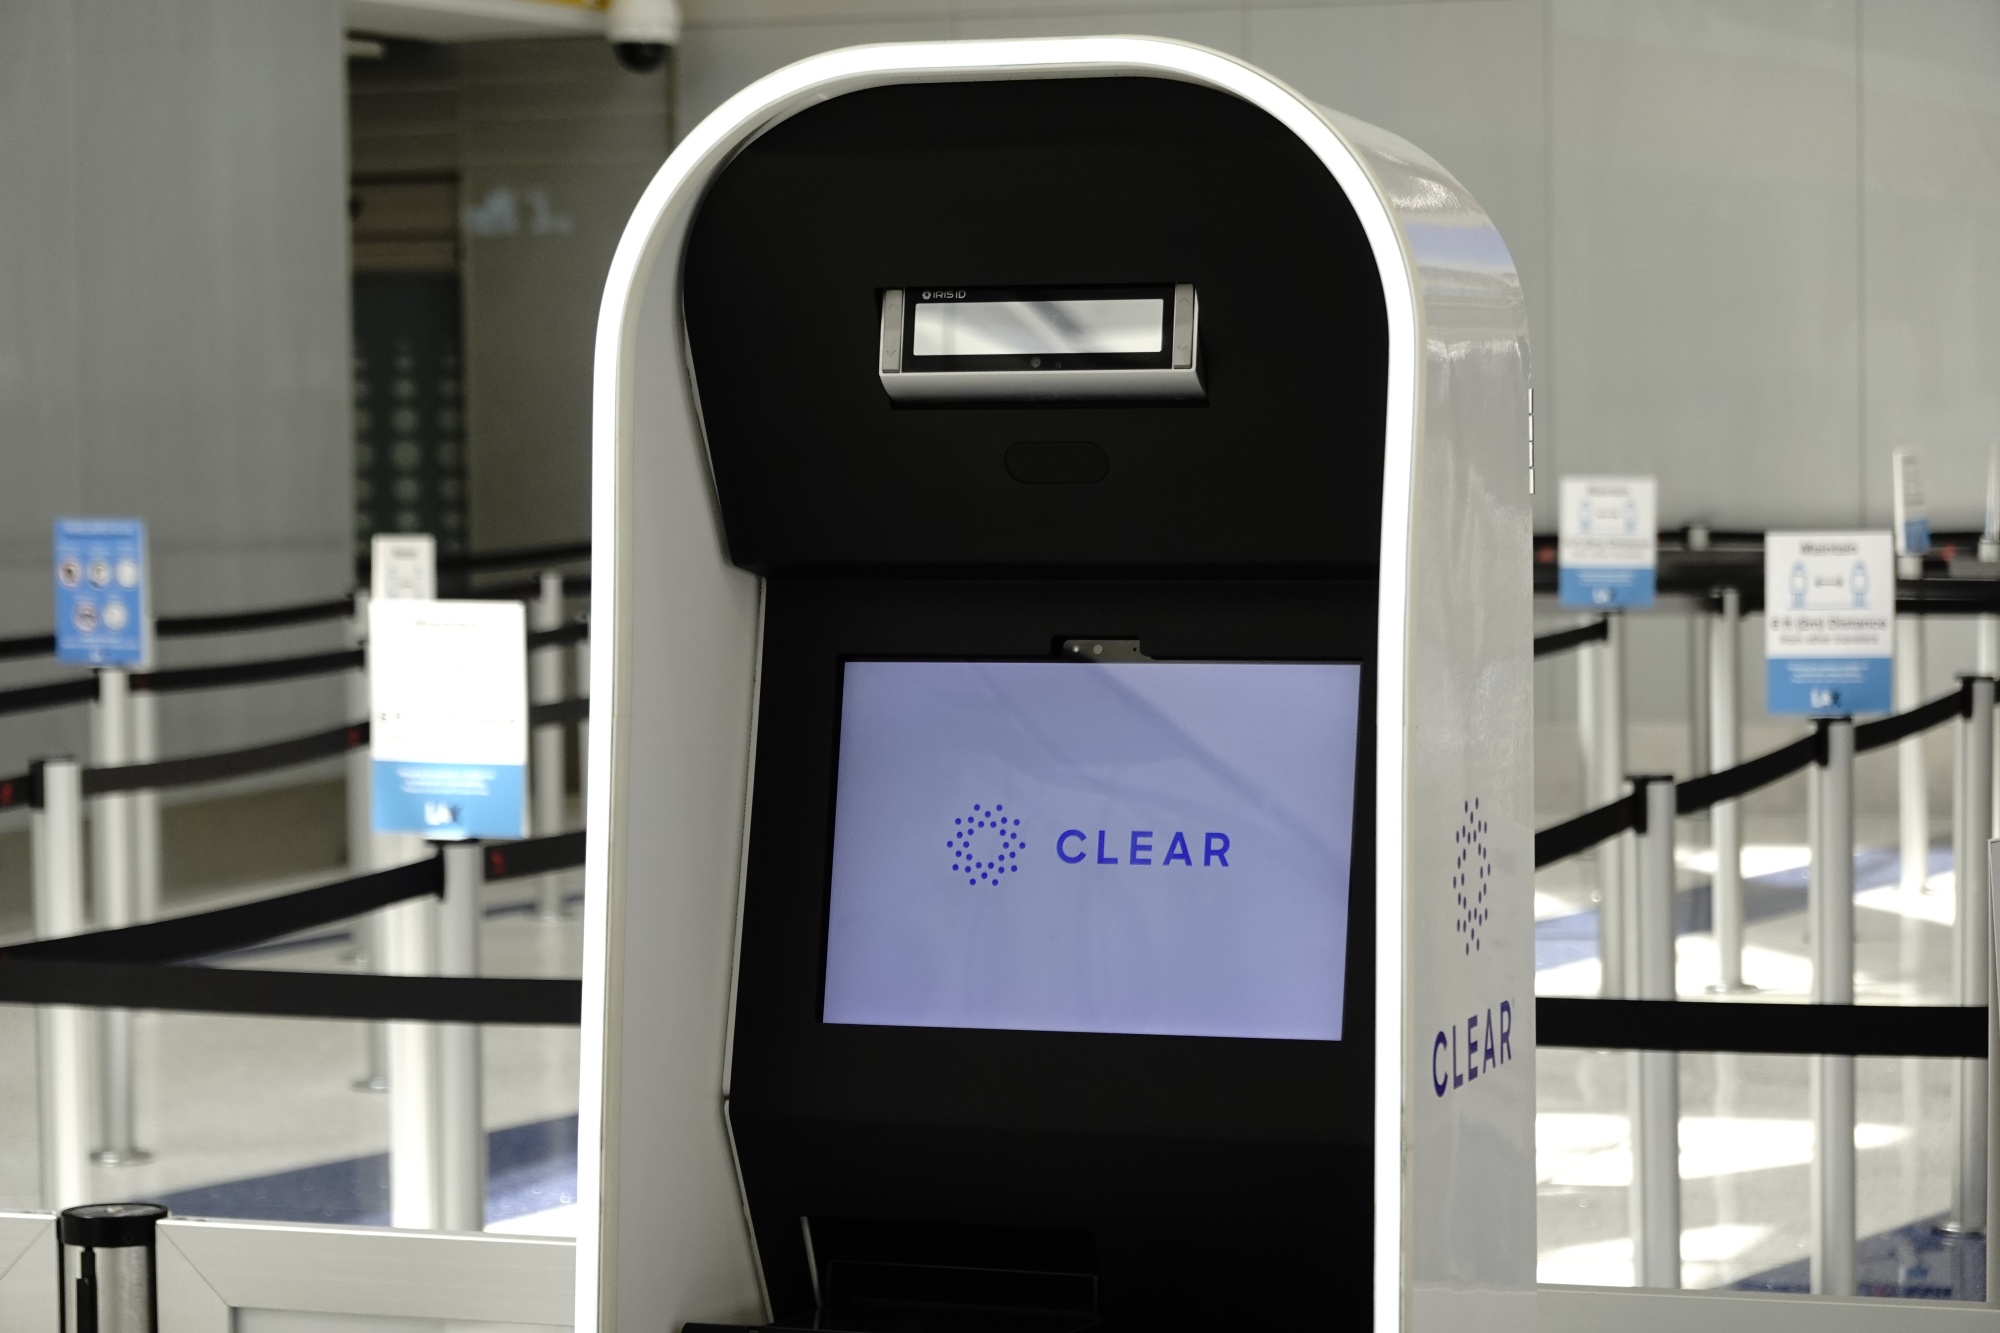 Clear Secure Faces More Scrutiny With Added Airport Incident Cases